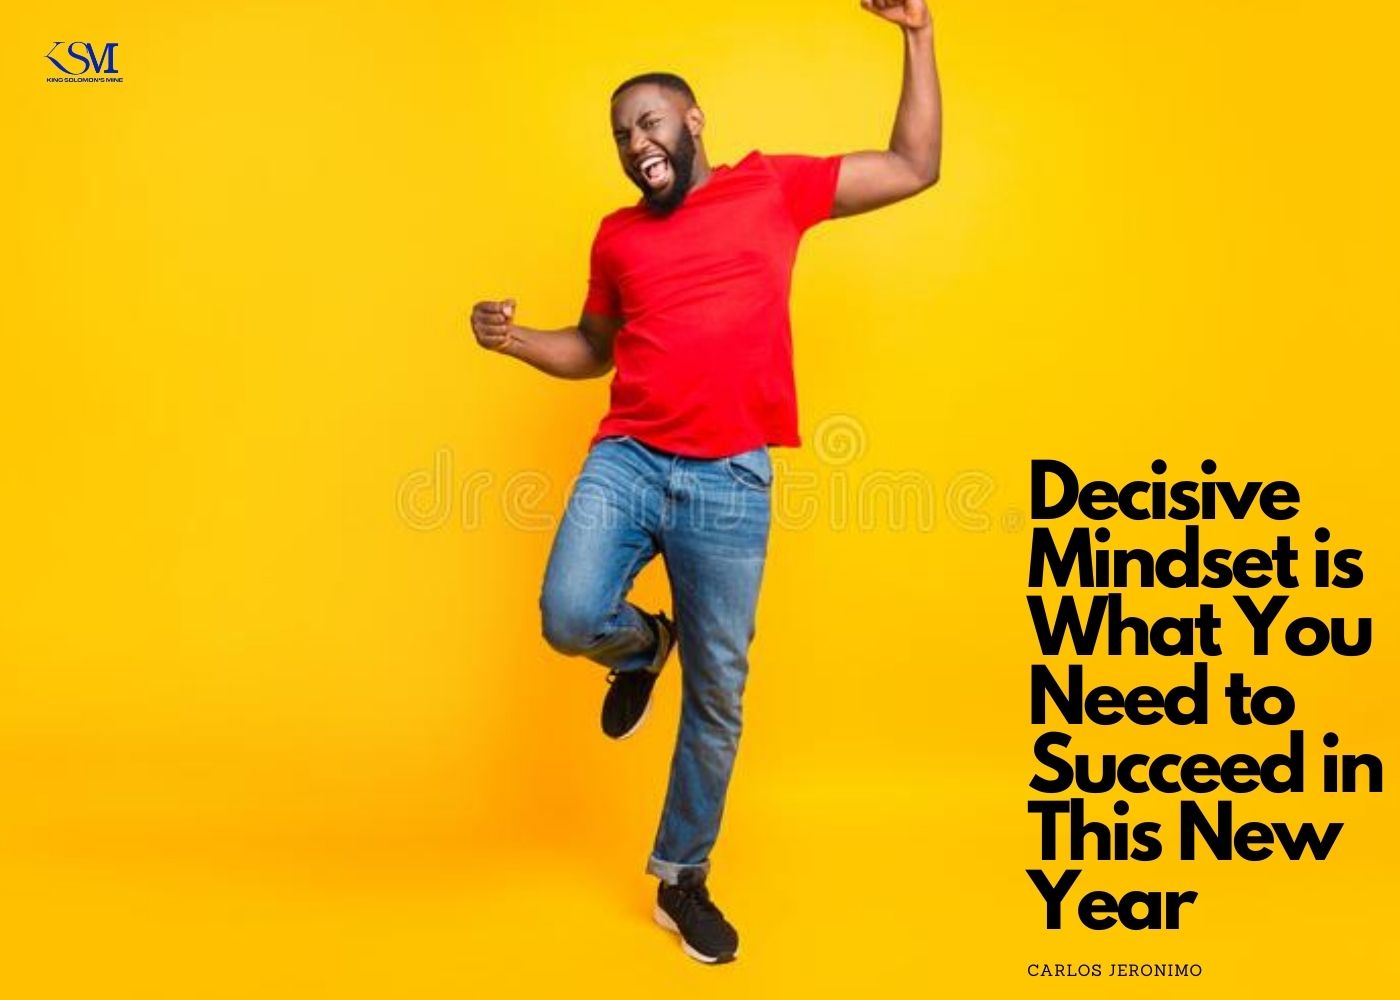 Decisive Mindset is What You Need to Succeed in This New Year